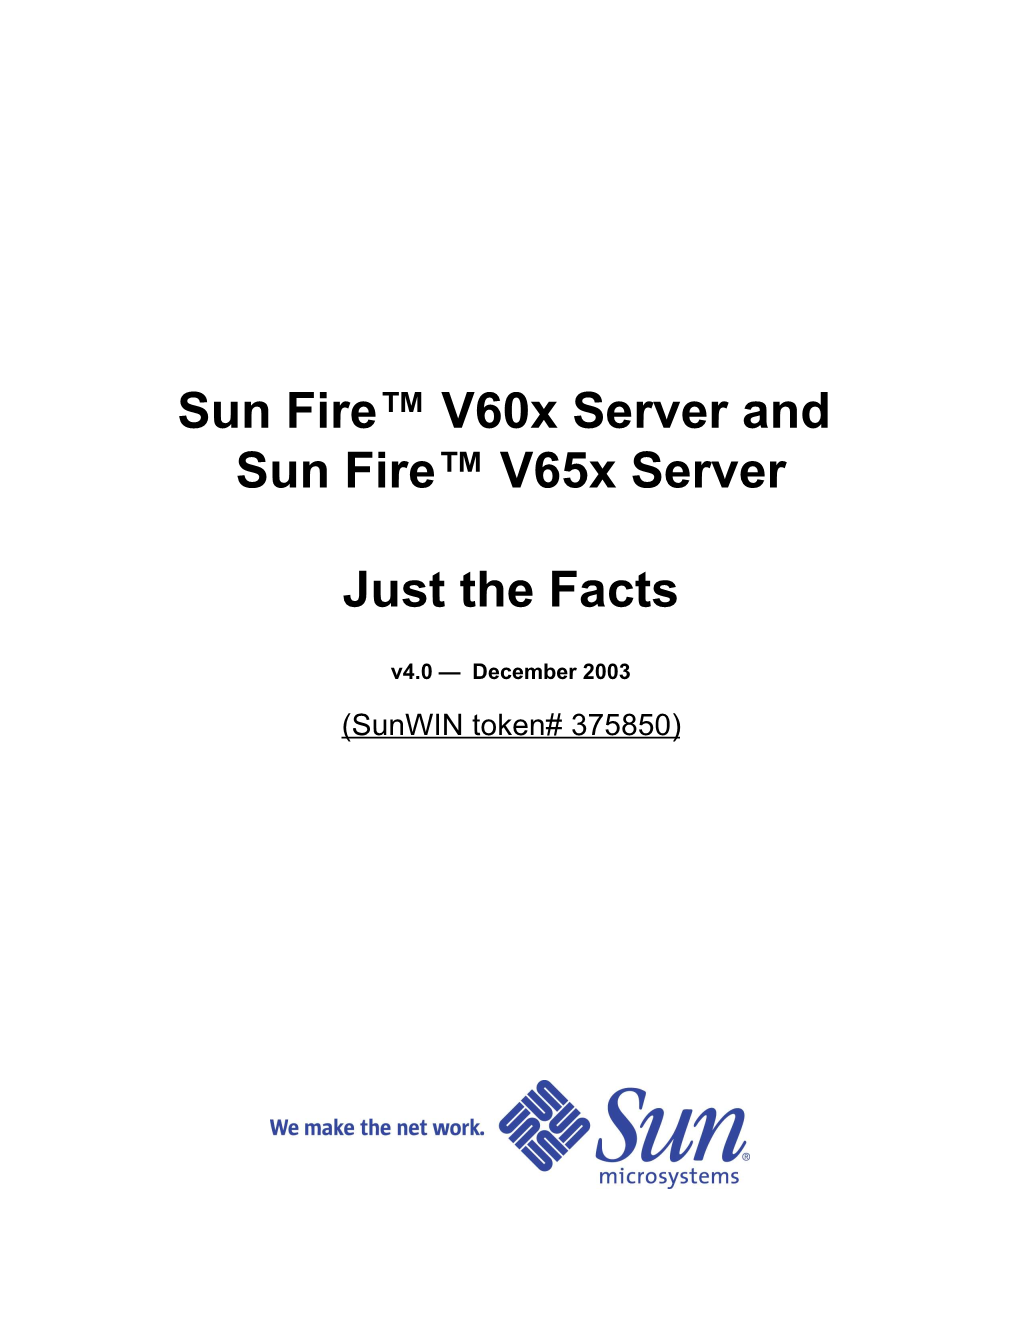 Sun Fire™ V60x Server and Sun Fire™ V65x Server Just the Facts